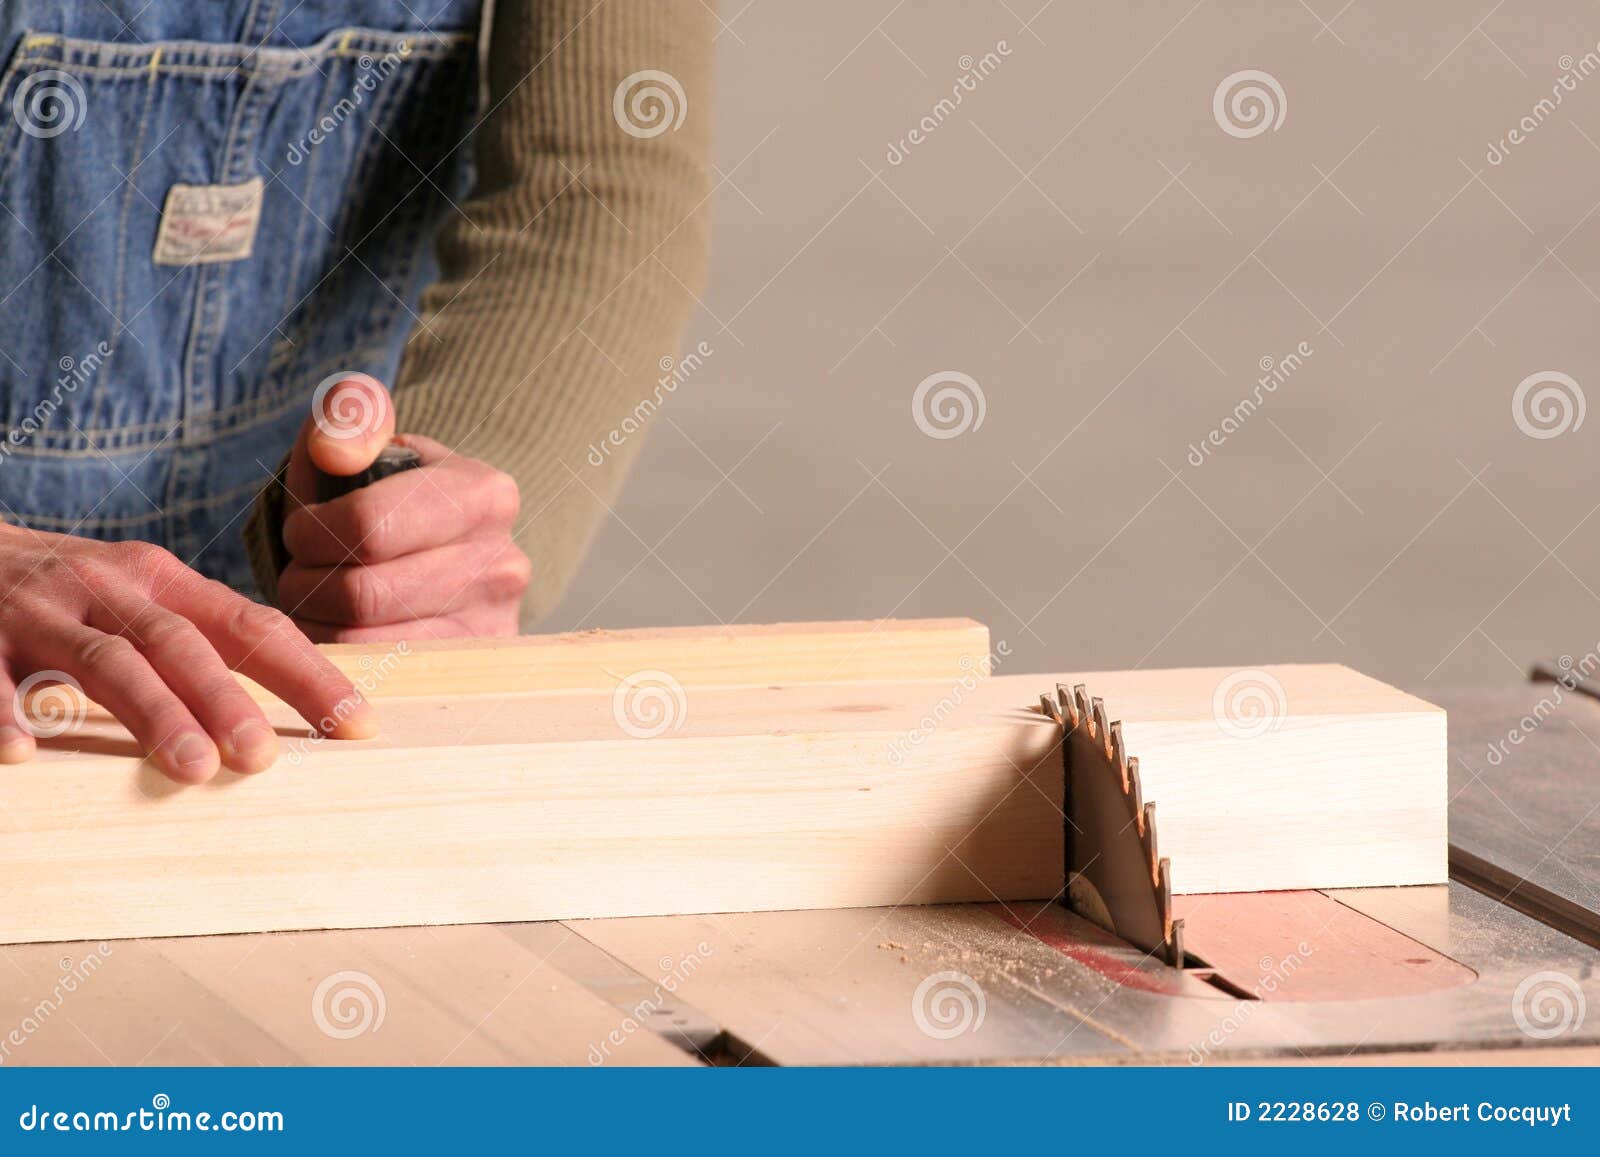 Cutting stock photo. Image of girl, tablesaw, concentration - 2228628